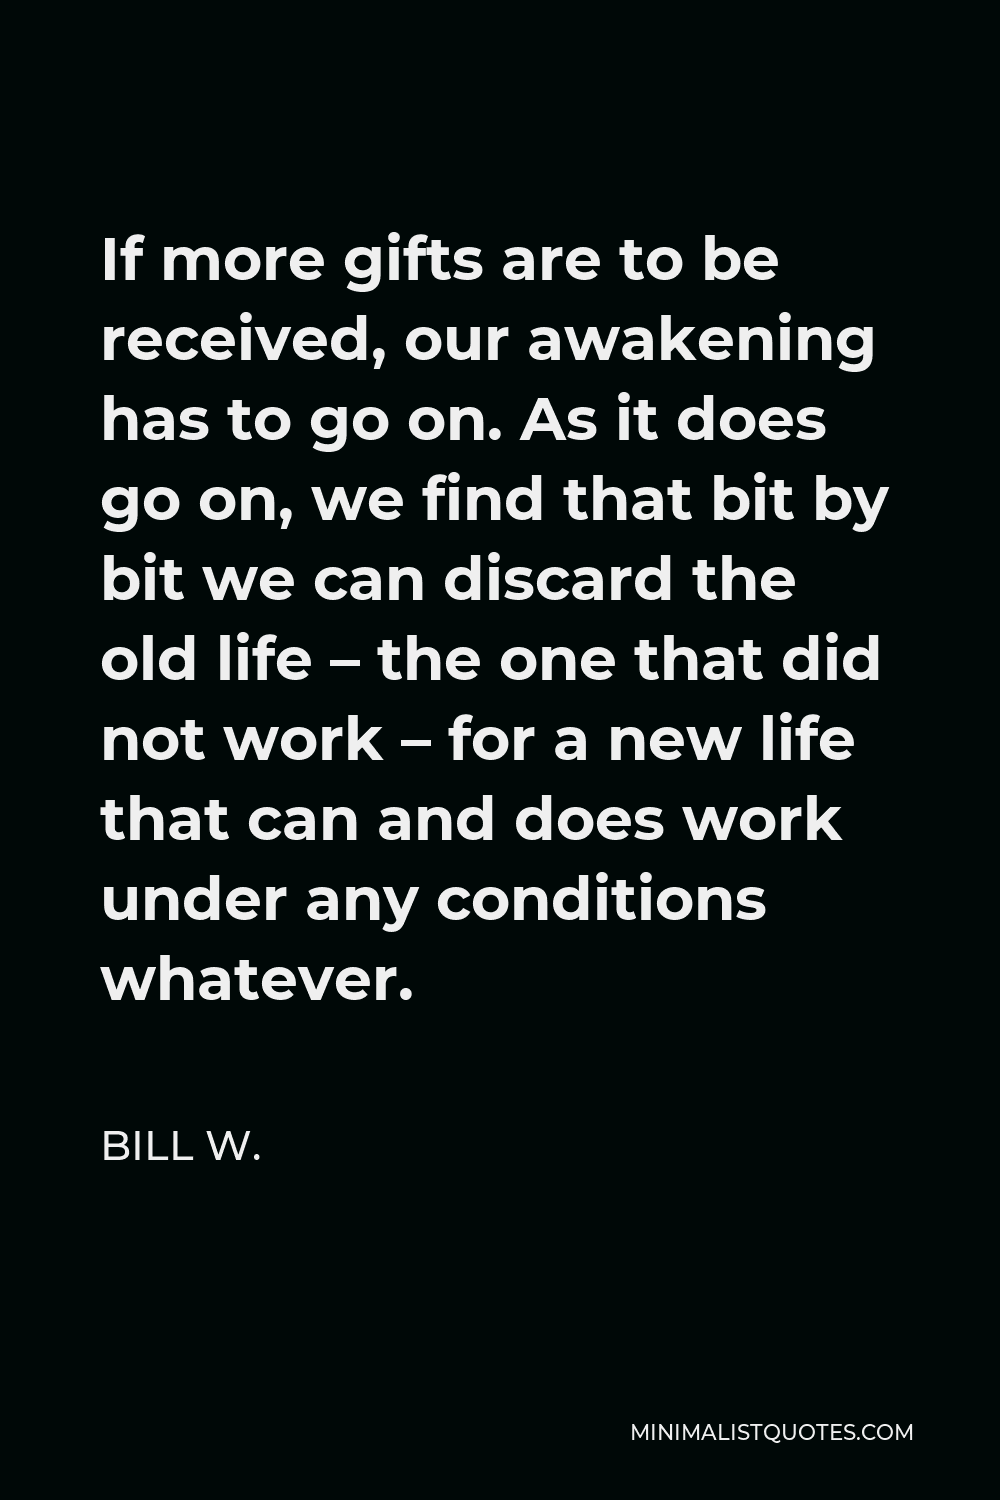 Bill W. Quote - If more gifts are to be received, our awakening has to go on. As it does go on, we find that bit by bit we can discard the old life – the one that did not work – for a new life that can and does work under any conditions whatever.